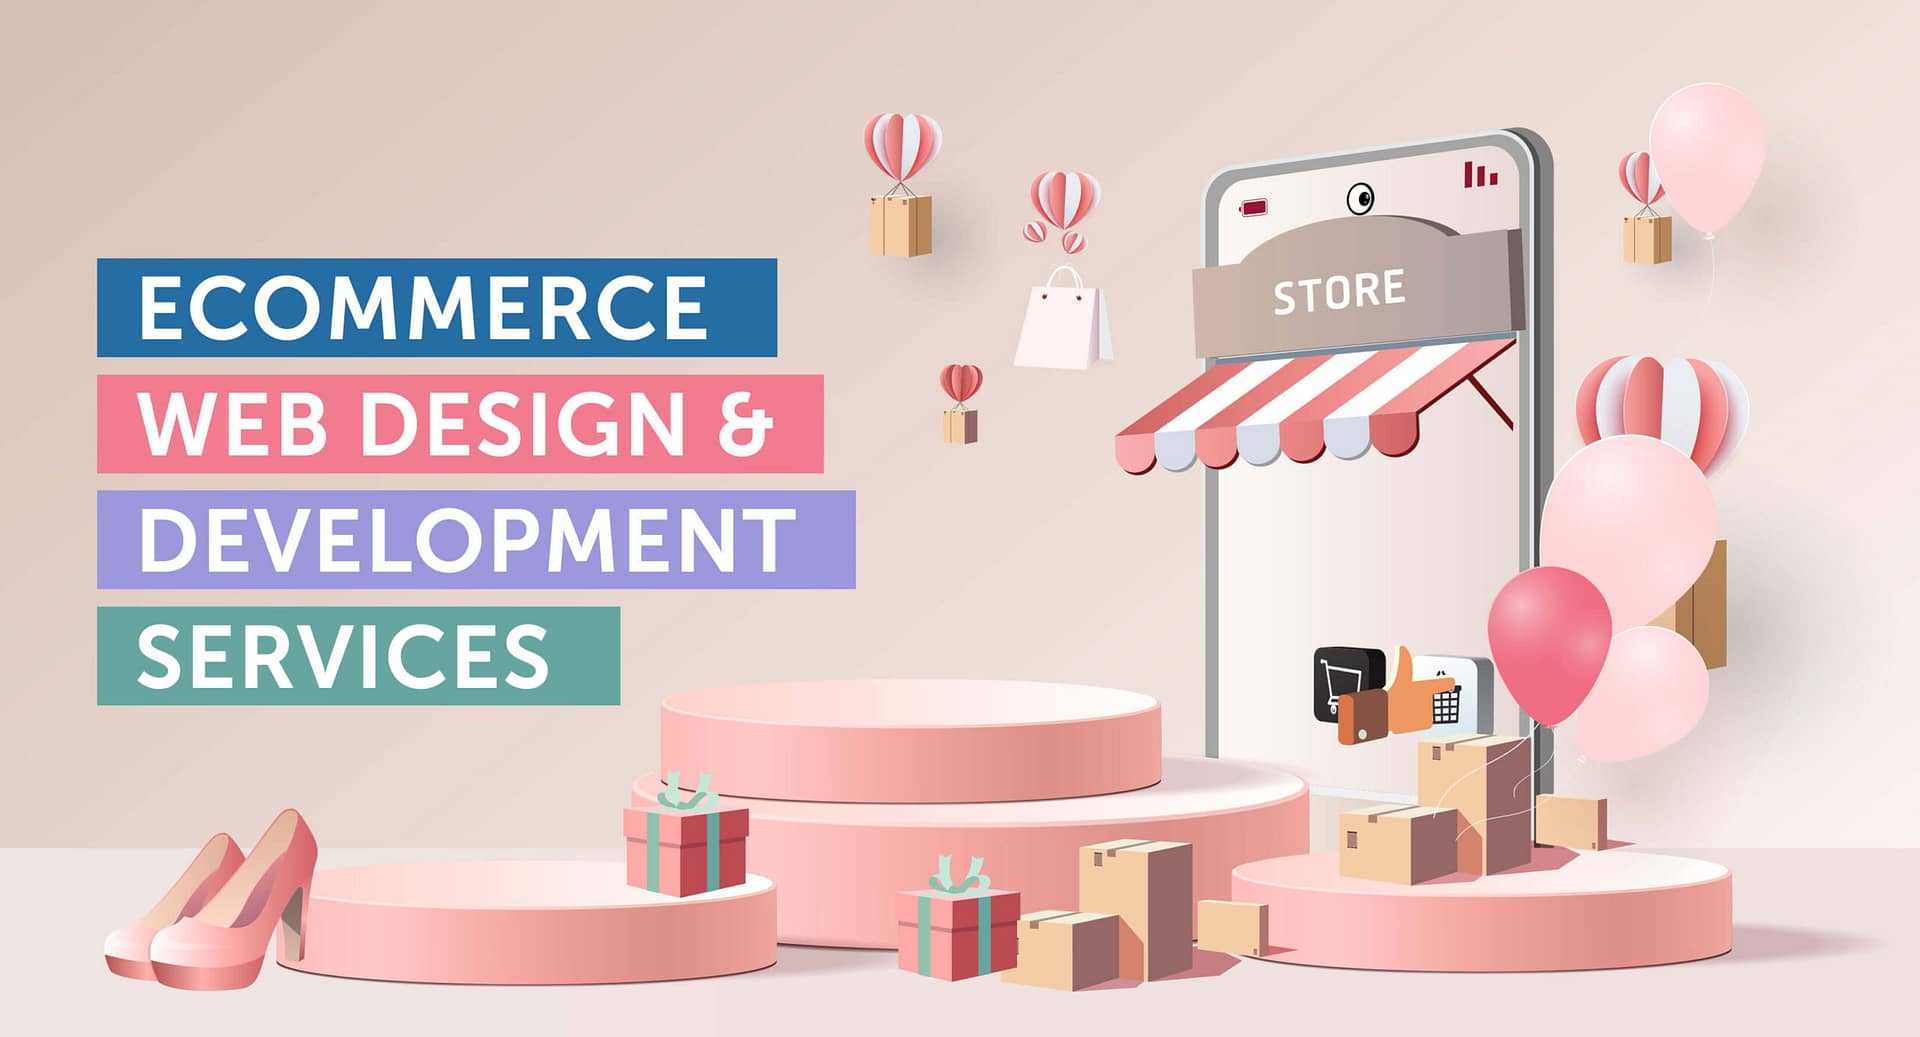 How to Design an E-commerce Website That Boosts Sales